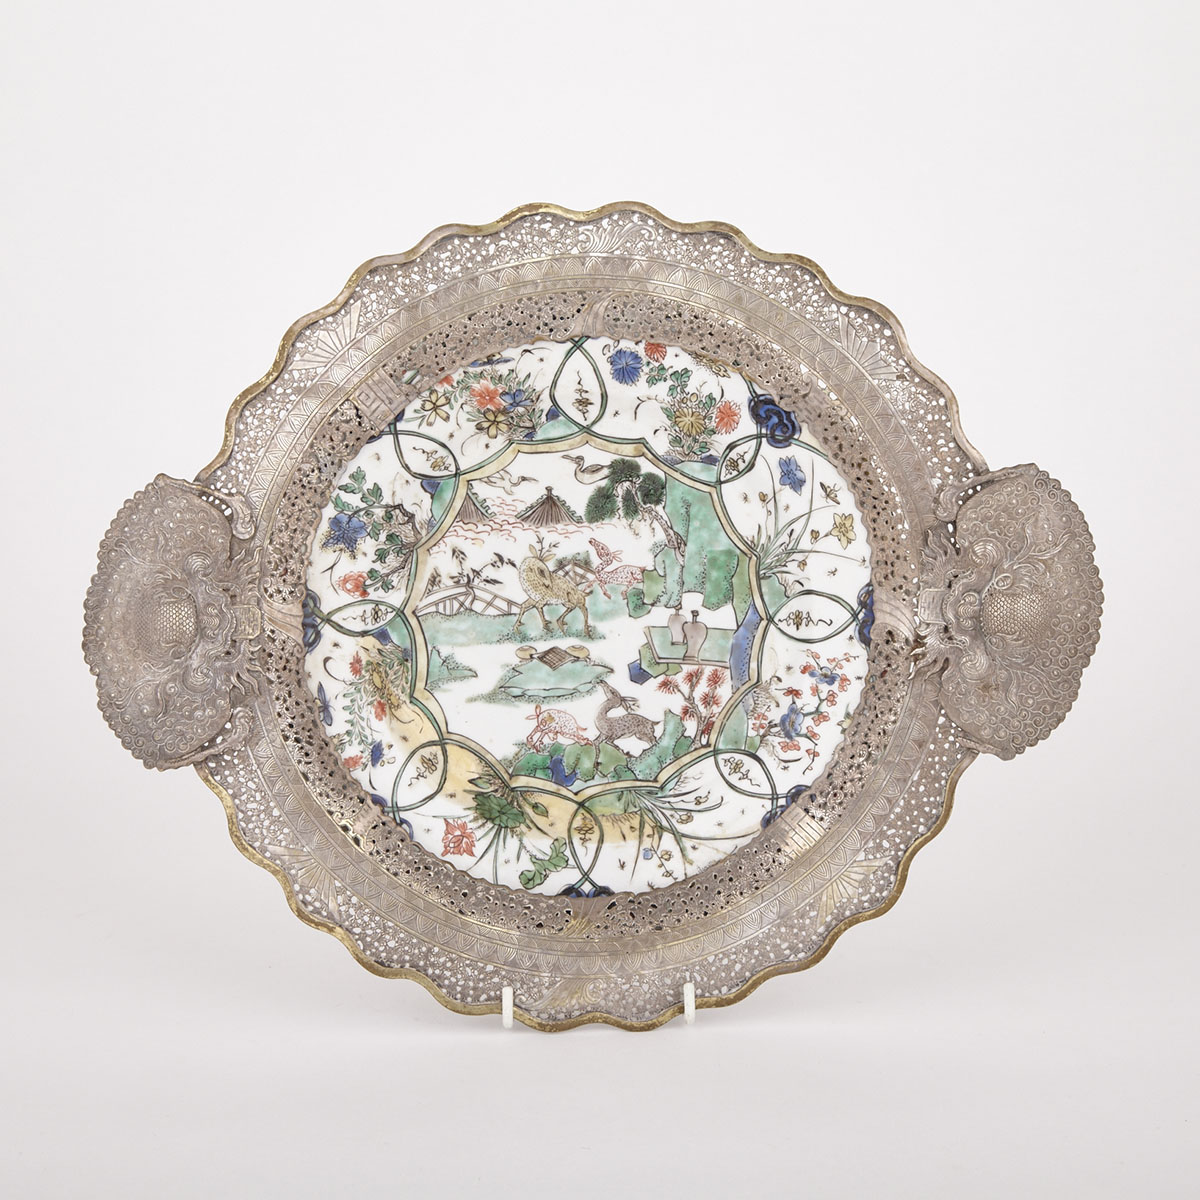 Wucai Plate Mounted with Silver, Kangxi Period, 17th Century (Plate)